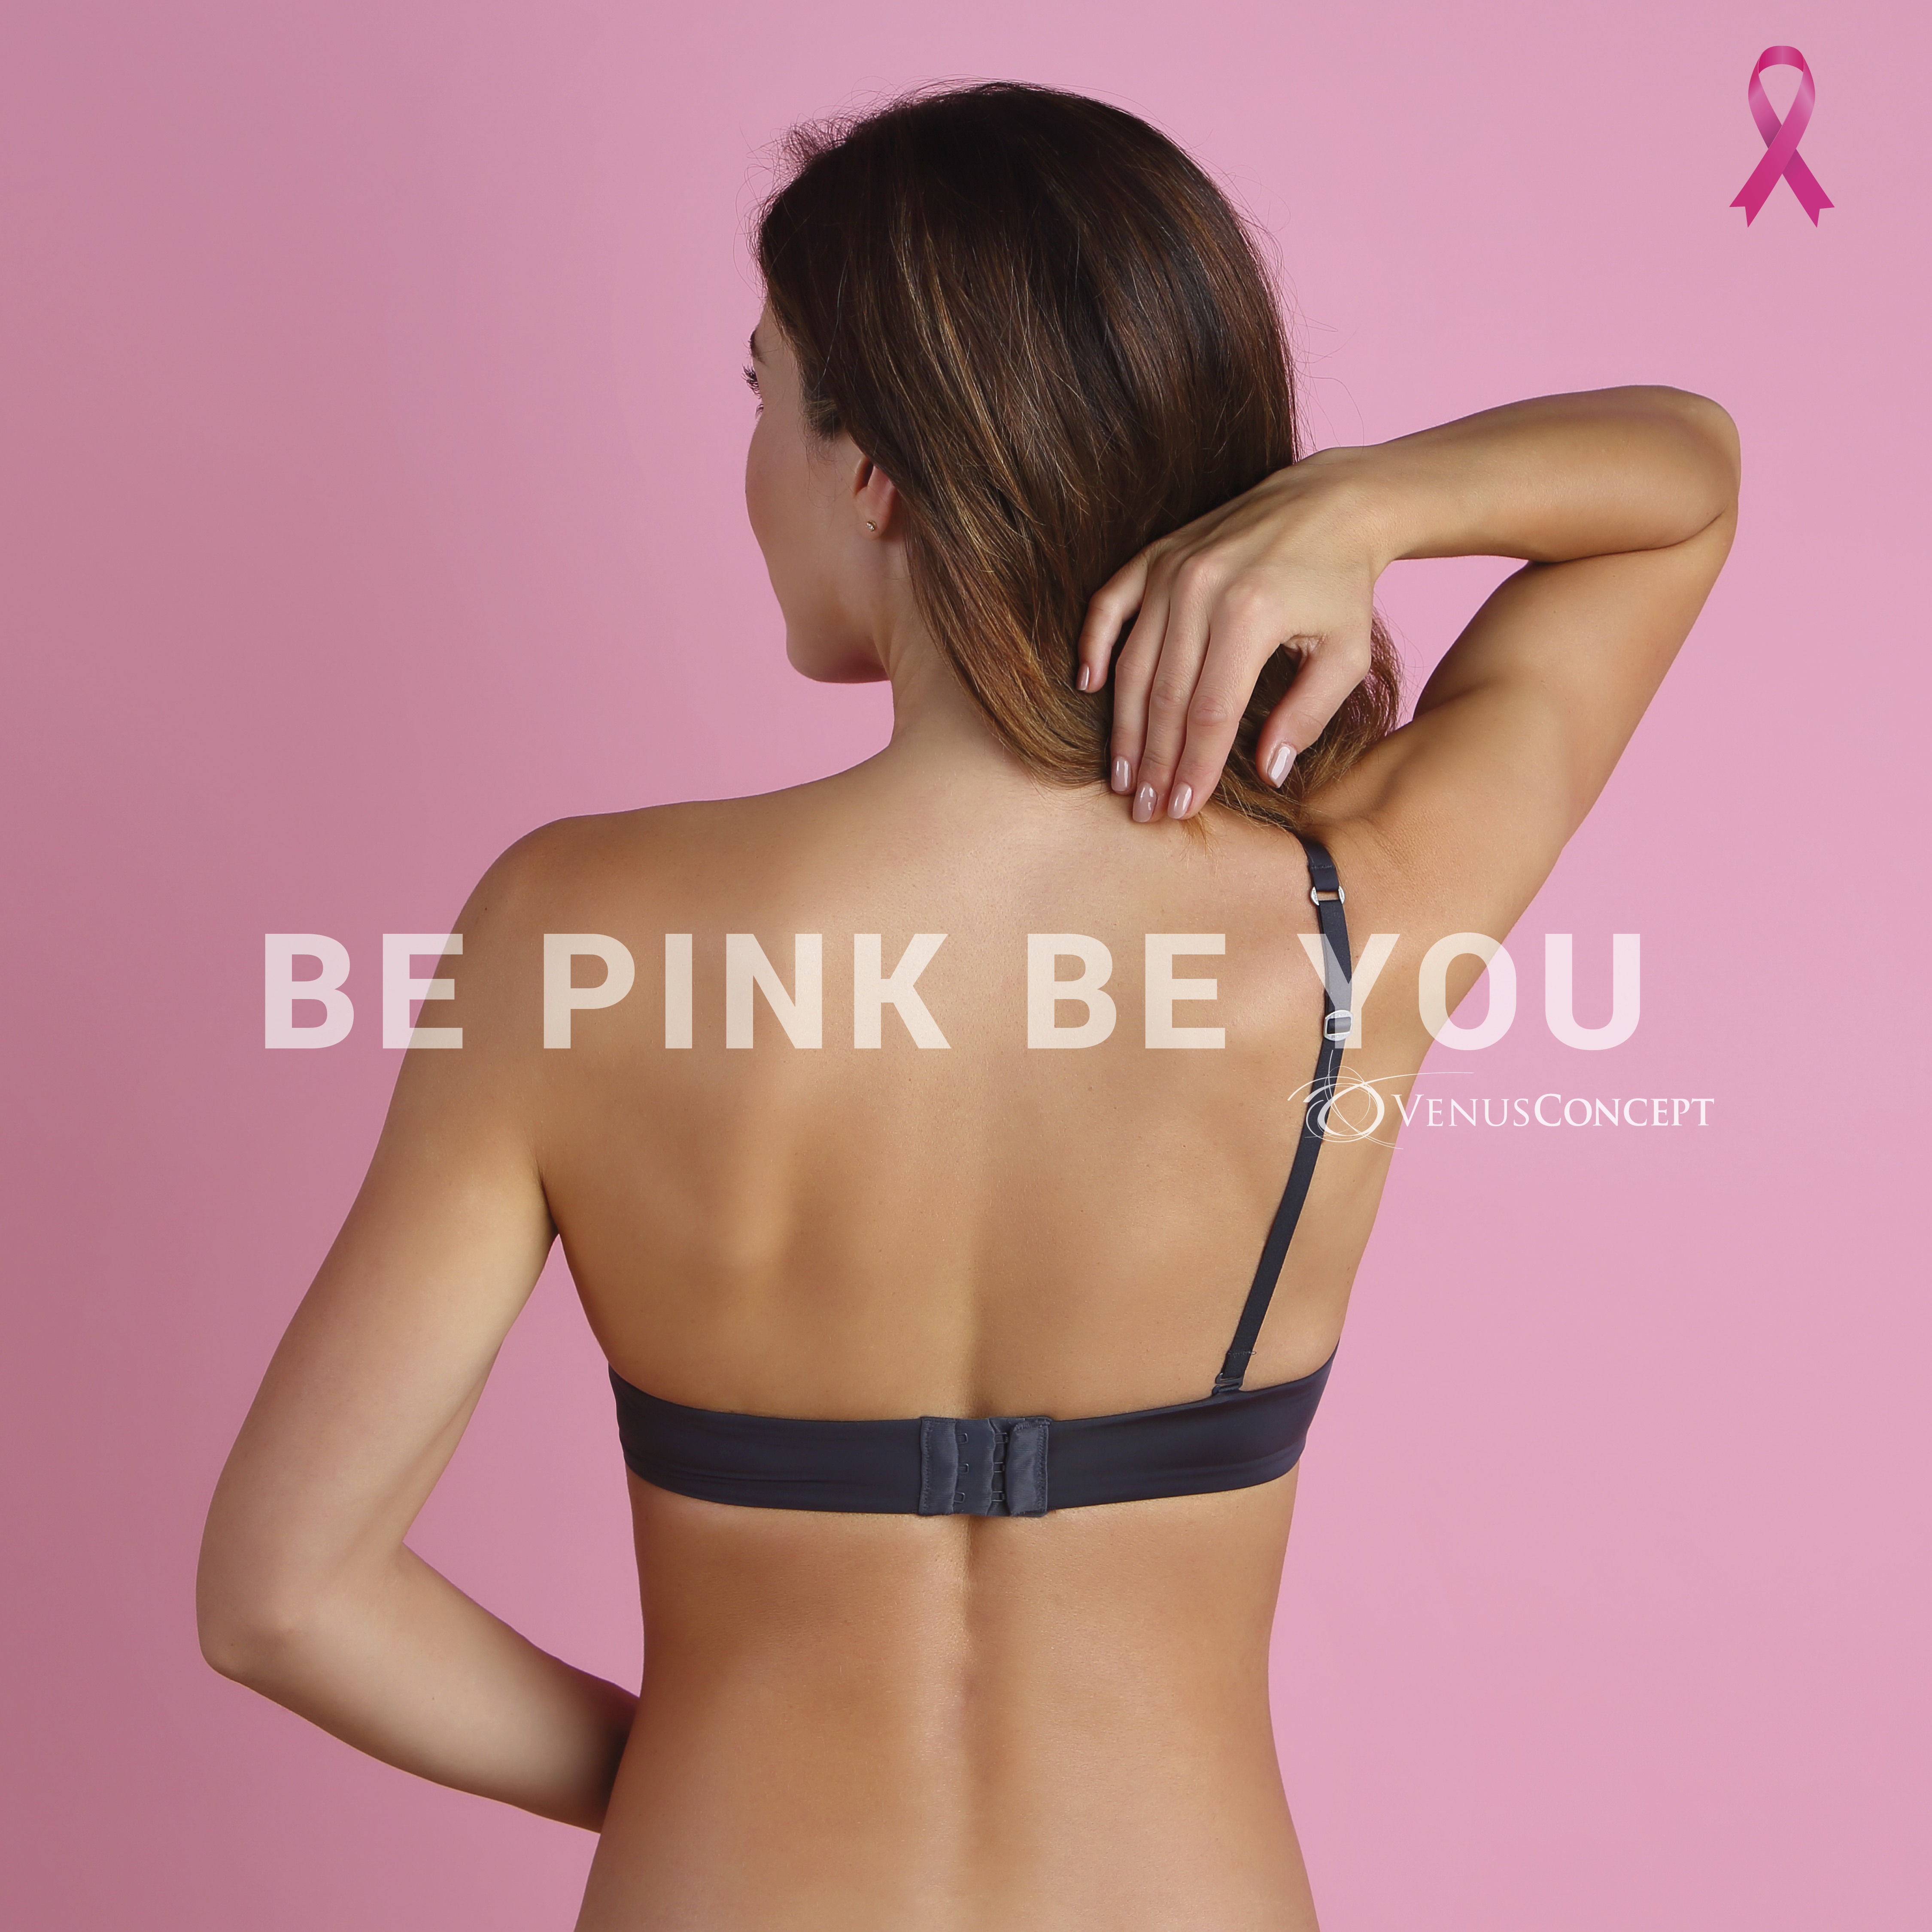 BE PINK BE YOU